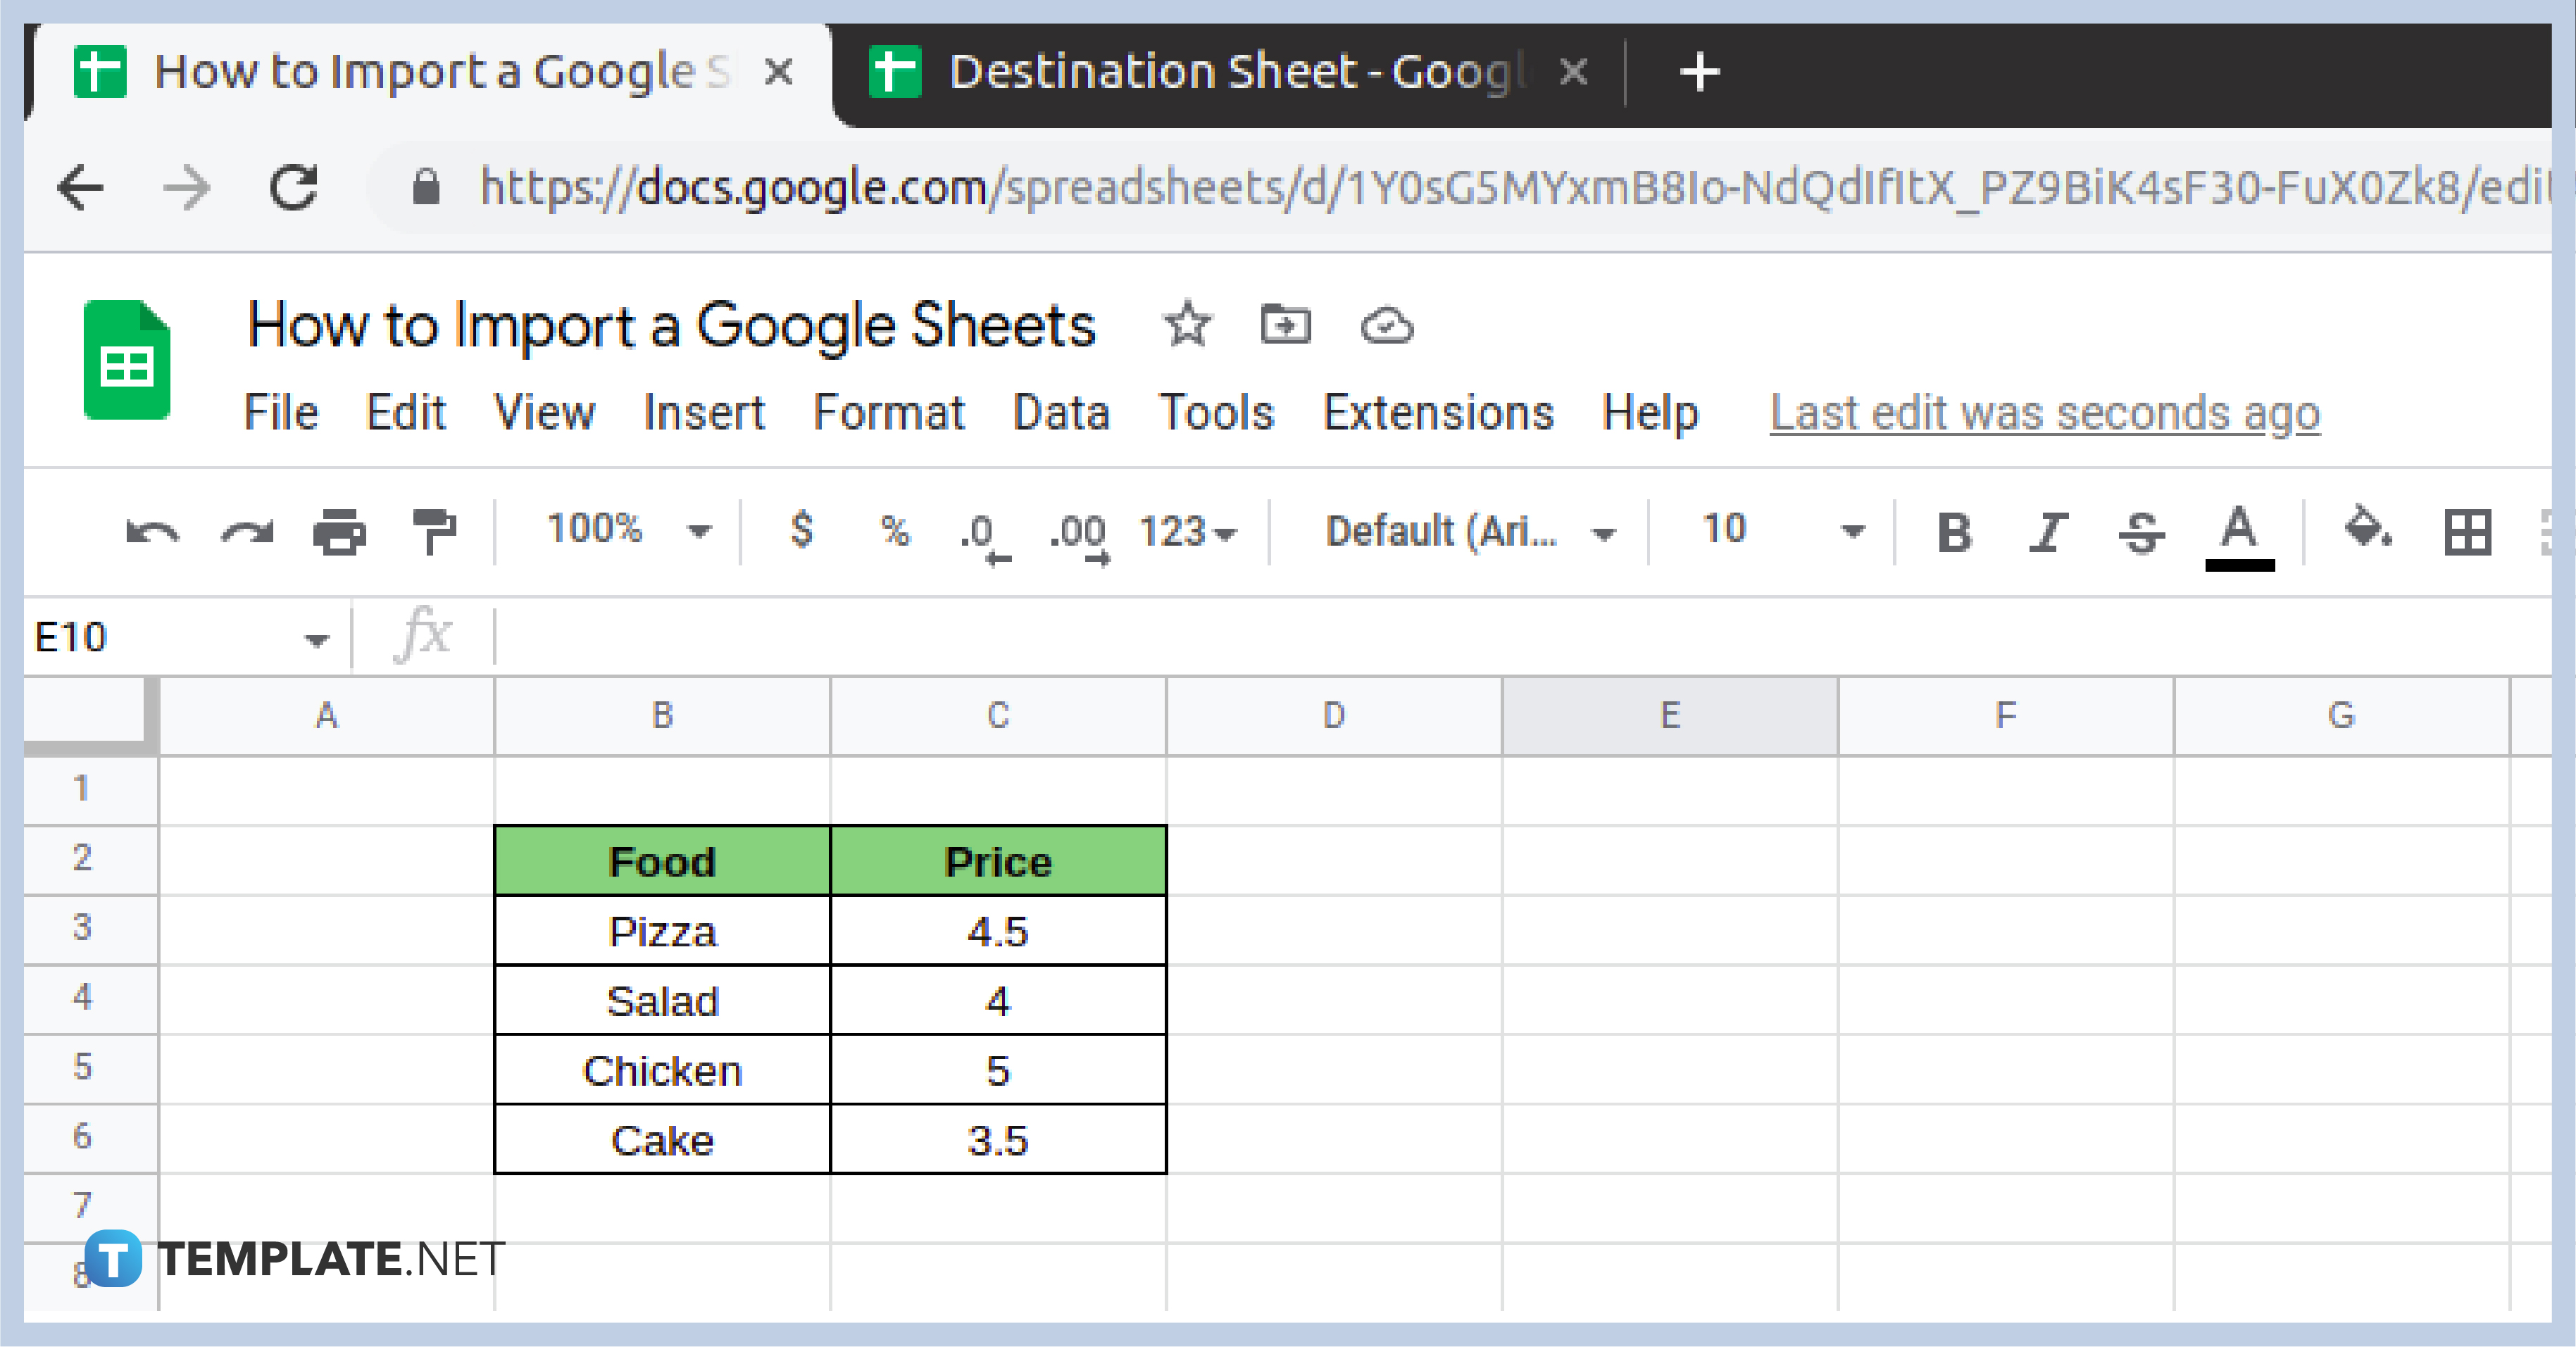 how-to-import-a-google-sheets-step-1